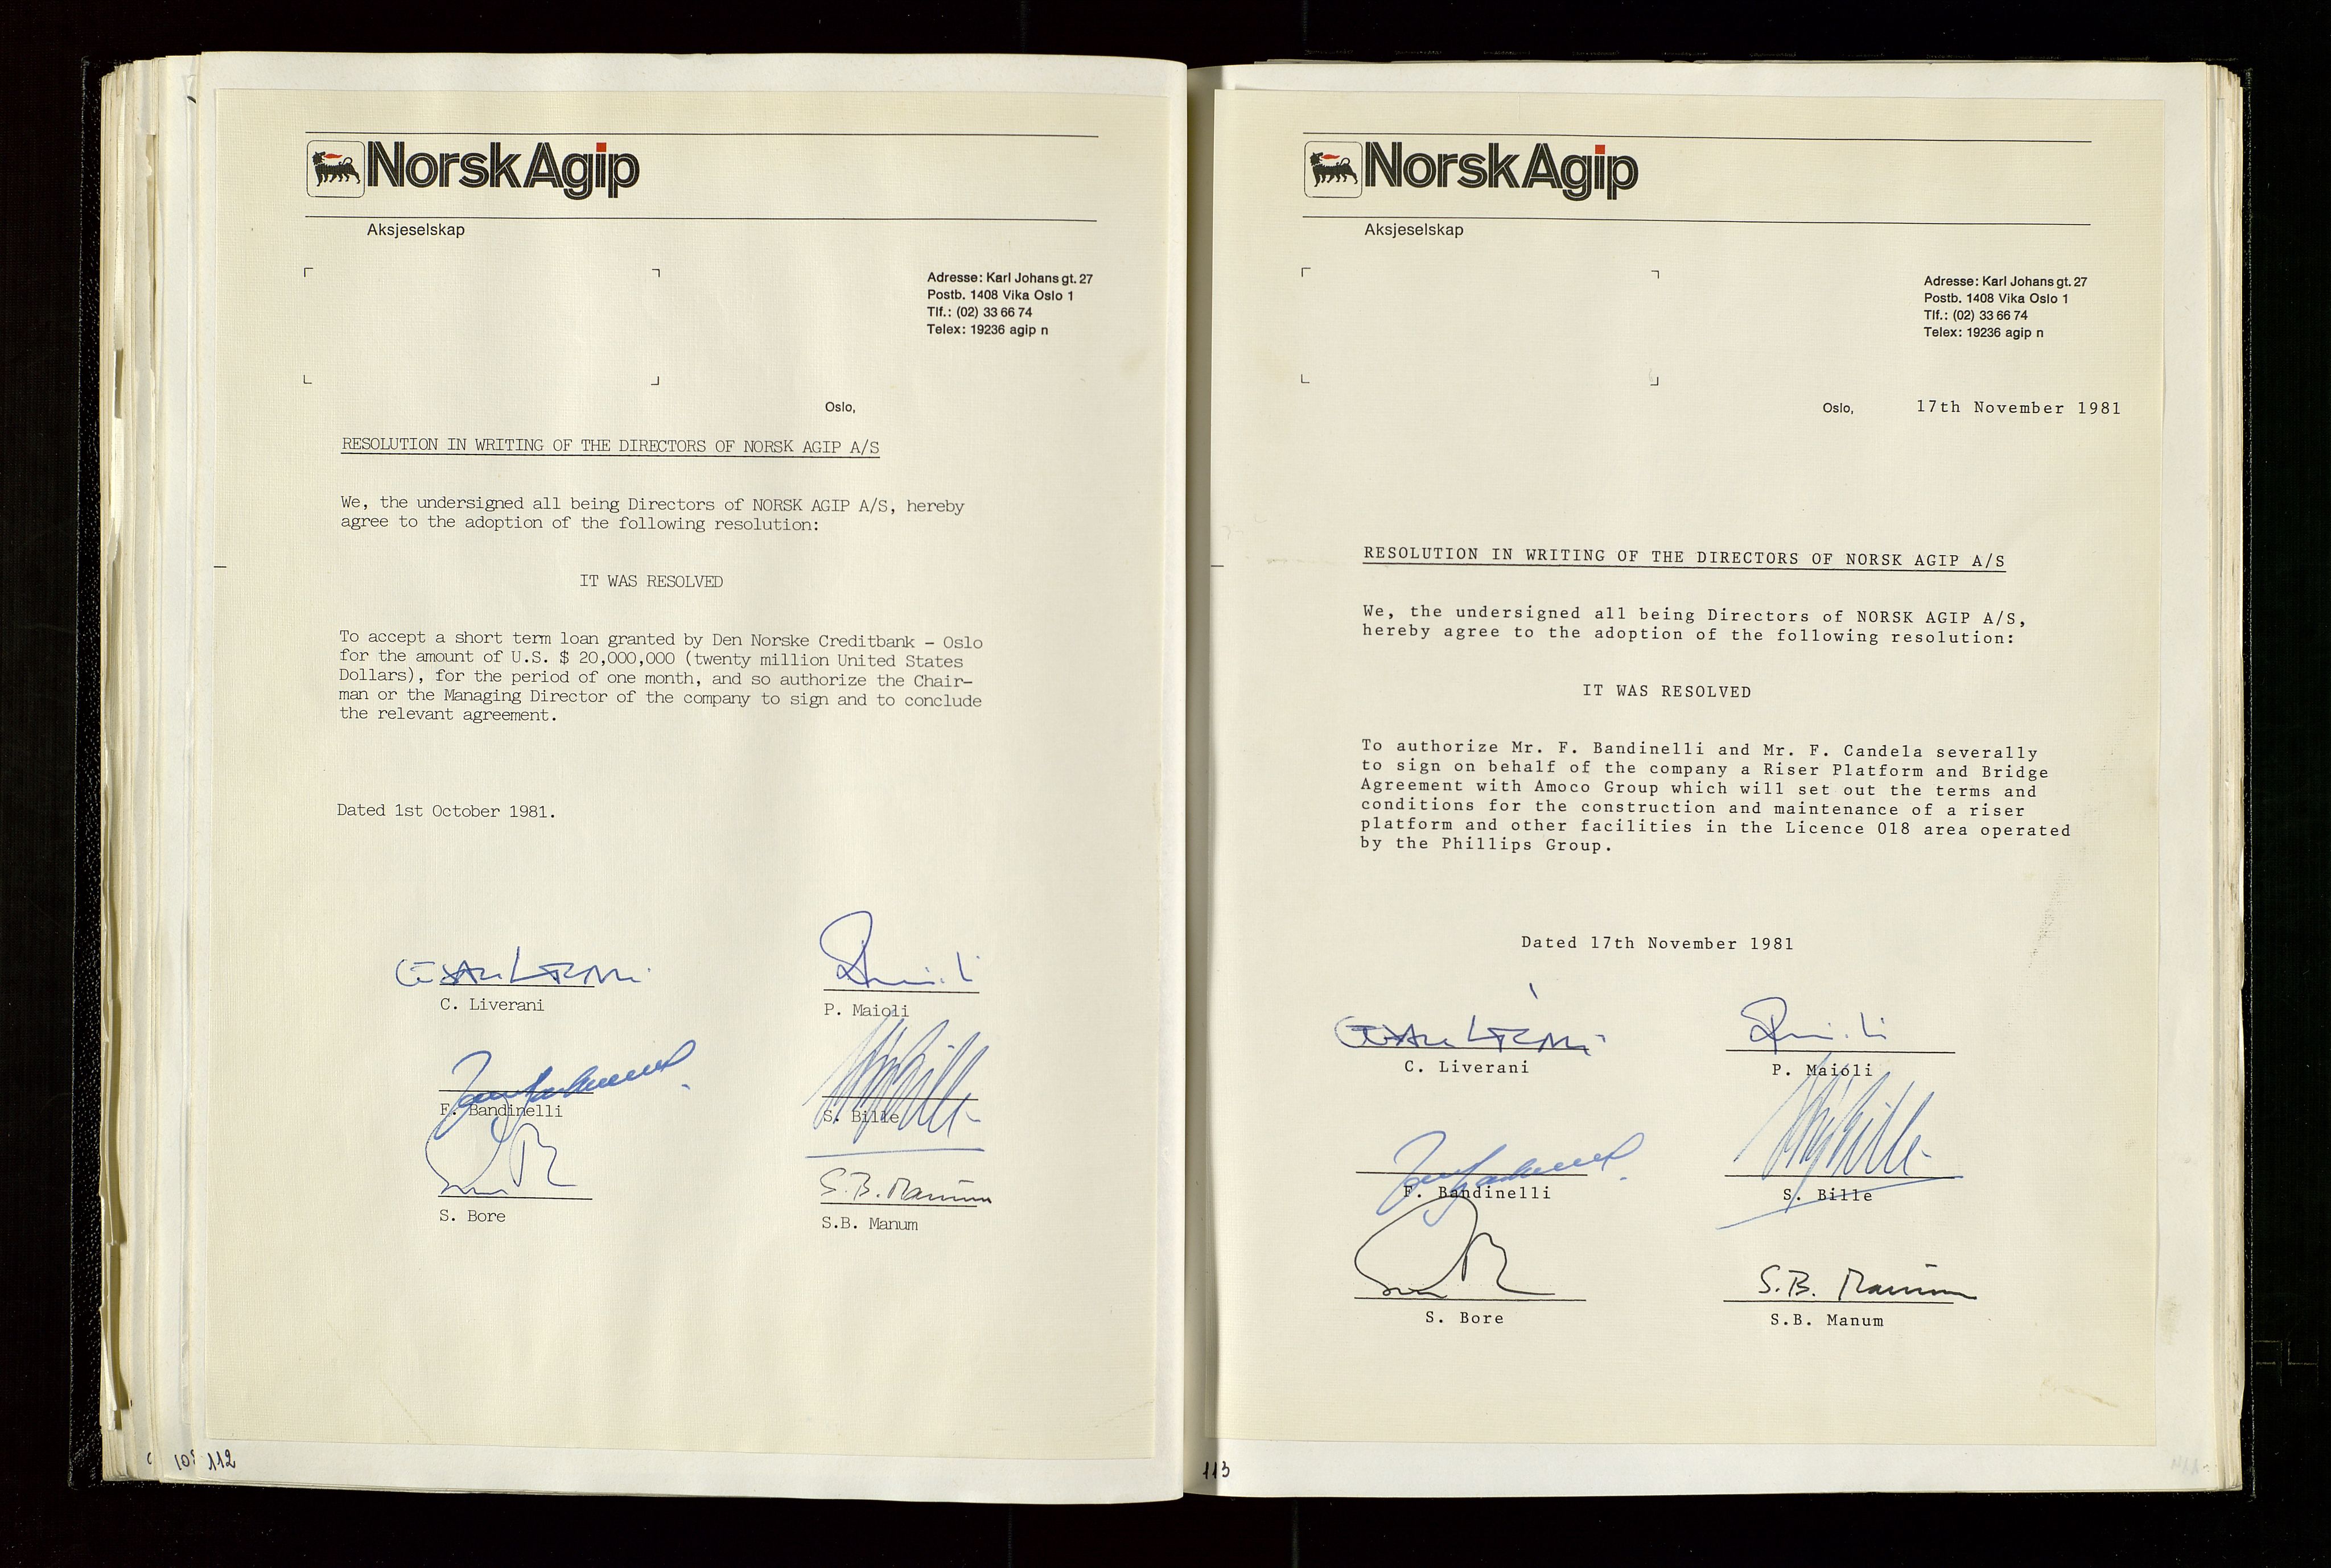 Pa 1583 - Norsk Agip AS, SAST/A-102138/A/Aa/L0003: Board of Directors meeting minutes, 1979-1983, p. 112-113